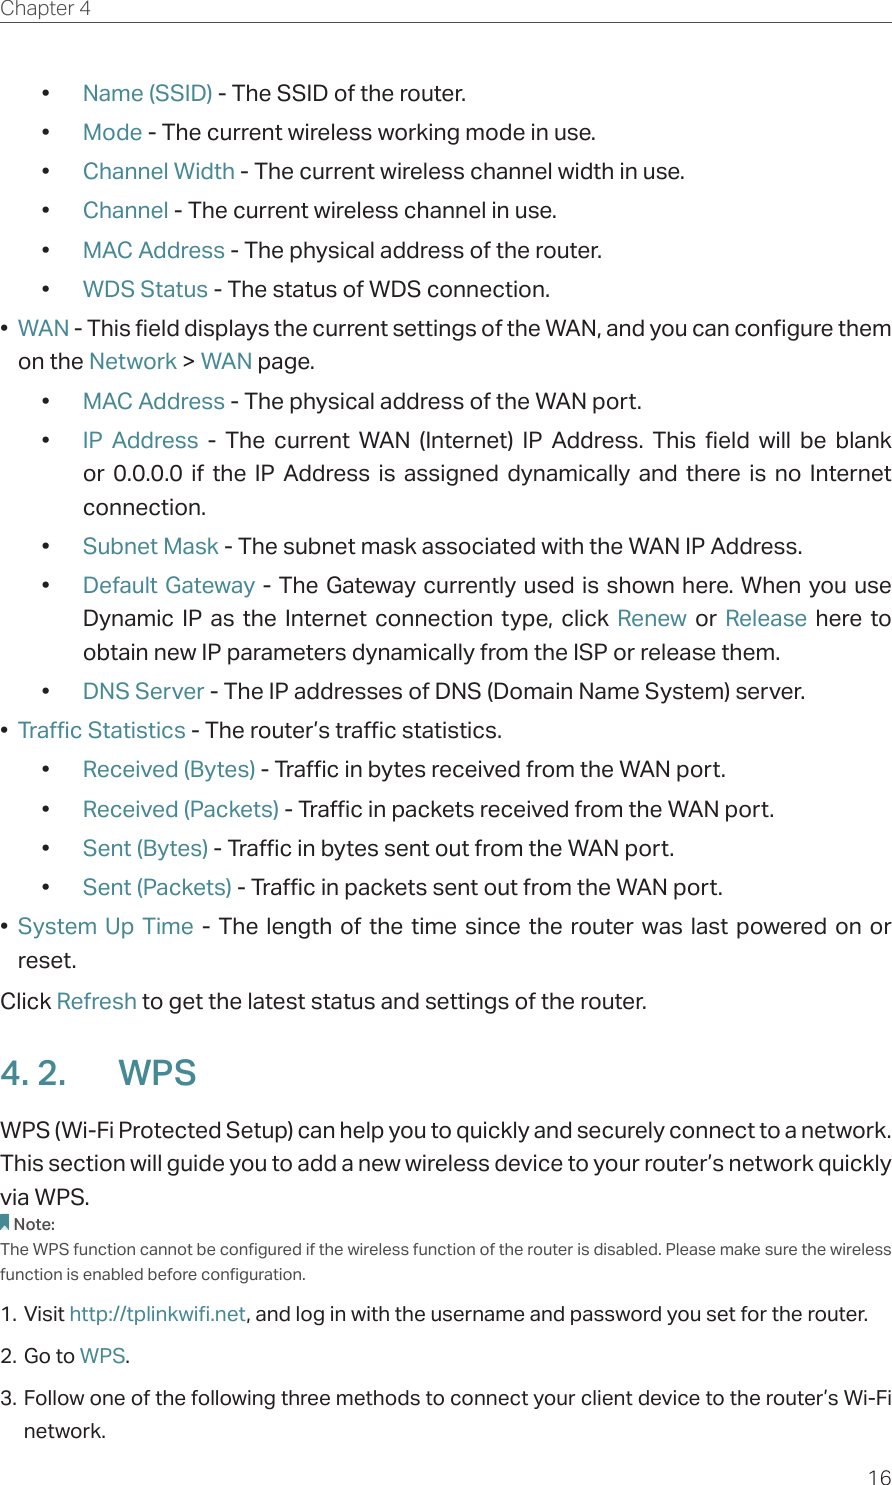 16Chapter 4  •  Name (SSID) - The SSID of the router.•  Mode - The current wireless working mode in use.•  Channel Width - The current wireless channel width in use.•  Channel - The current wireless channel in use.•  MAC Address - The physical address of the router.•  WDS Status - The status of WDS connection.•  WAN - This field displays the current settings of the WAN, and you can configure them on the Network &gt; WAN page.•  MAC Address - The physical address of the WAN port.•  IP Address - The current WAN (Internet) IP Address. This field will be blank or 0.0.0.0 if the IP Address is assigned dynamically and there is no Internet connection.•  Subnet Mask - The subnet mask associated with the WAN IP Address.•  Default Gateway - The Gateway currently used is shown here. When you use Dynamic IP as the Internet connection type, click Renew  or  Release here to obtain new IP parameters dynamically from the ISP or release them.•  DNS Server - The IP addresses of DNS (Domain Name System) server.•  Traffic Statistics - The router’s traffic statistics.•  Received (Bytes) - Traffic in bytes received from the WAN port.•  Received (Packets) - Traffic in packets received from the WAN port.•  Sent (Bytes) - Traffic in bytes sent out from the WAN port.•  Sent (Packets) - Traffic in packets sent out from the WAN port.•  System Up Time - The length of the time since the router was last powered on or reset.Click Refresh to get the latest status and settings of the router.4. 2.  WPSWPS (Wi-Fi Protected Setup) can help you to quickly and securely connect to a network. This section will guide you to add a new wireless device to your router’s network quickly via WPS.Note:The WPS function cannot be configured if the wireless function of the router is disabled. Please make sure the wireless function is enabled before configuration.1. Visit http://tplinkwifi.net, and log in with the username and password you set for the router.2. Go to WPS. 3. Follow one of the following three methods to connect your client device to the router’s Wi-Fi network.